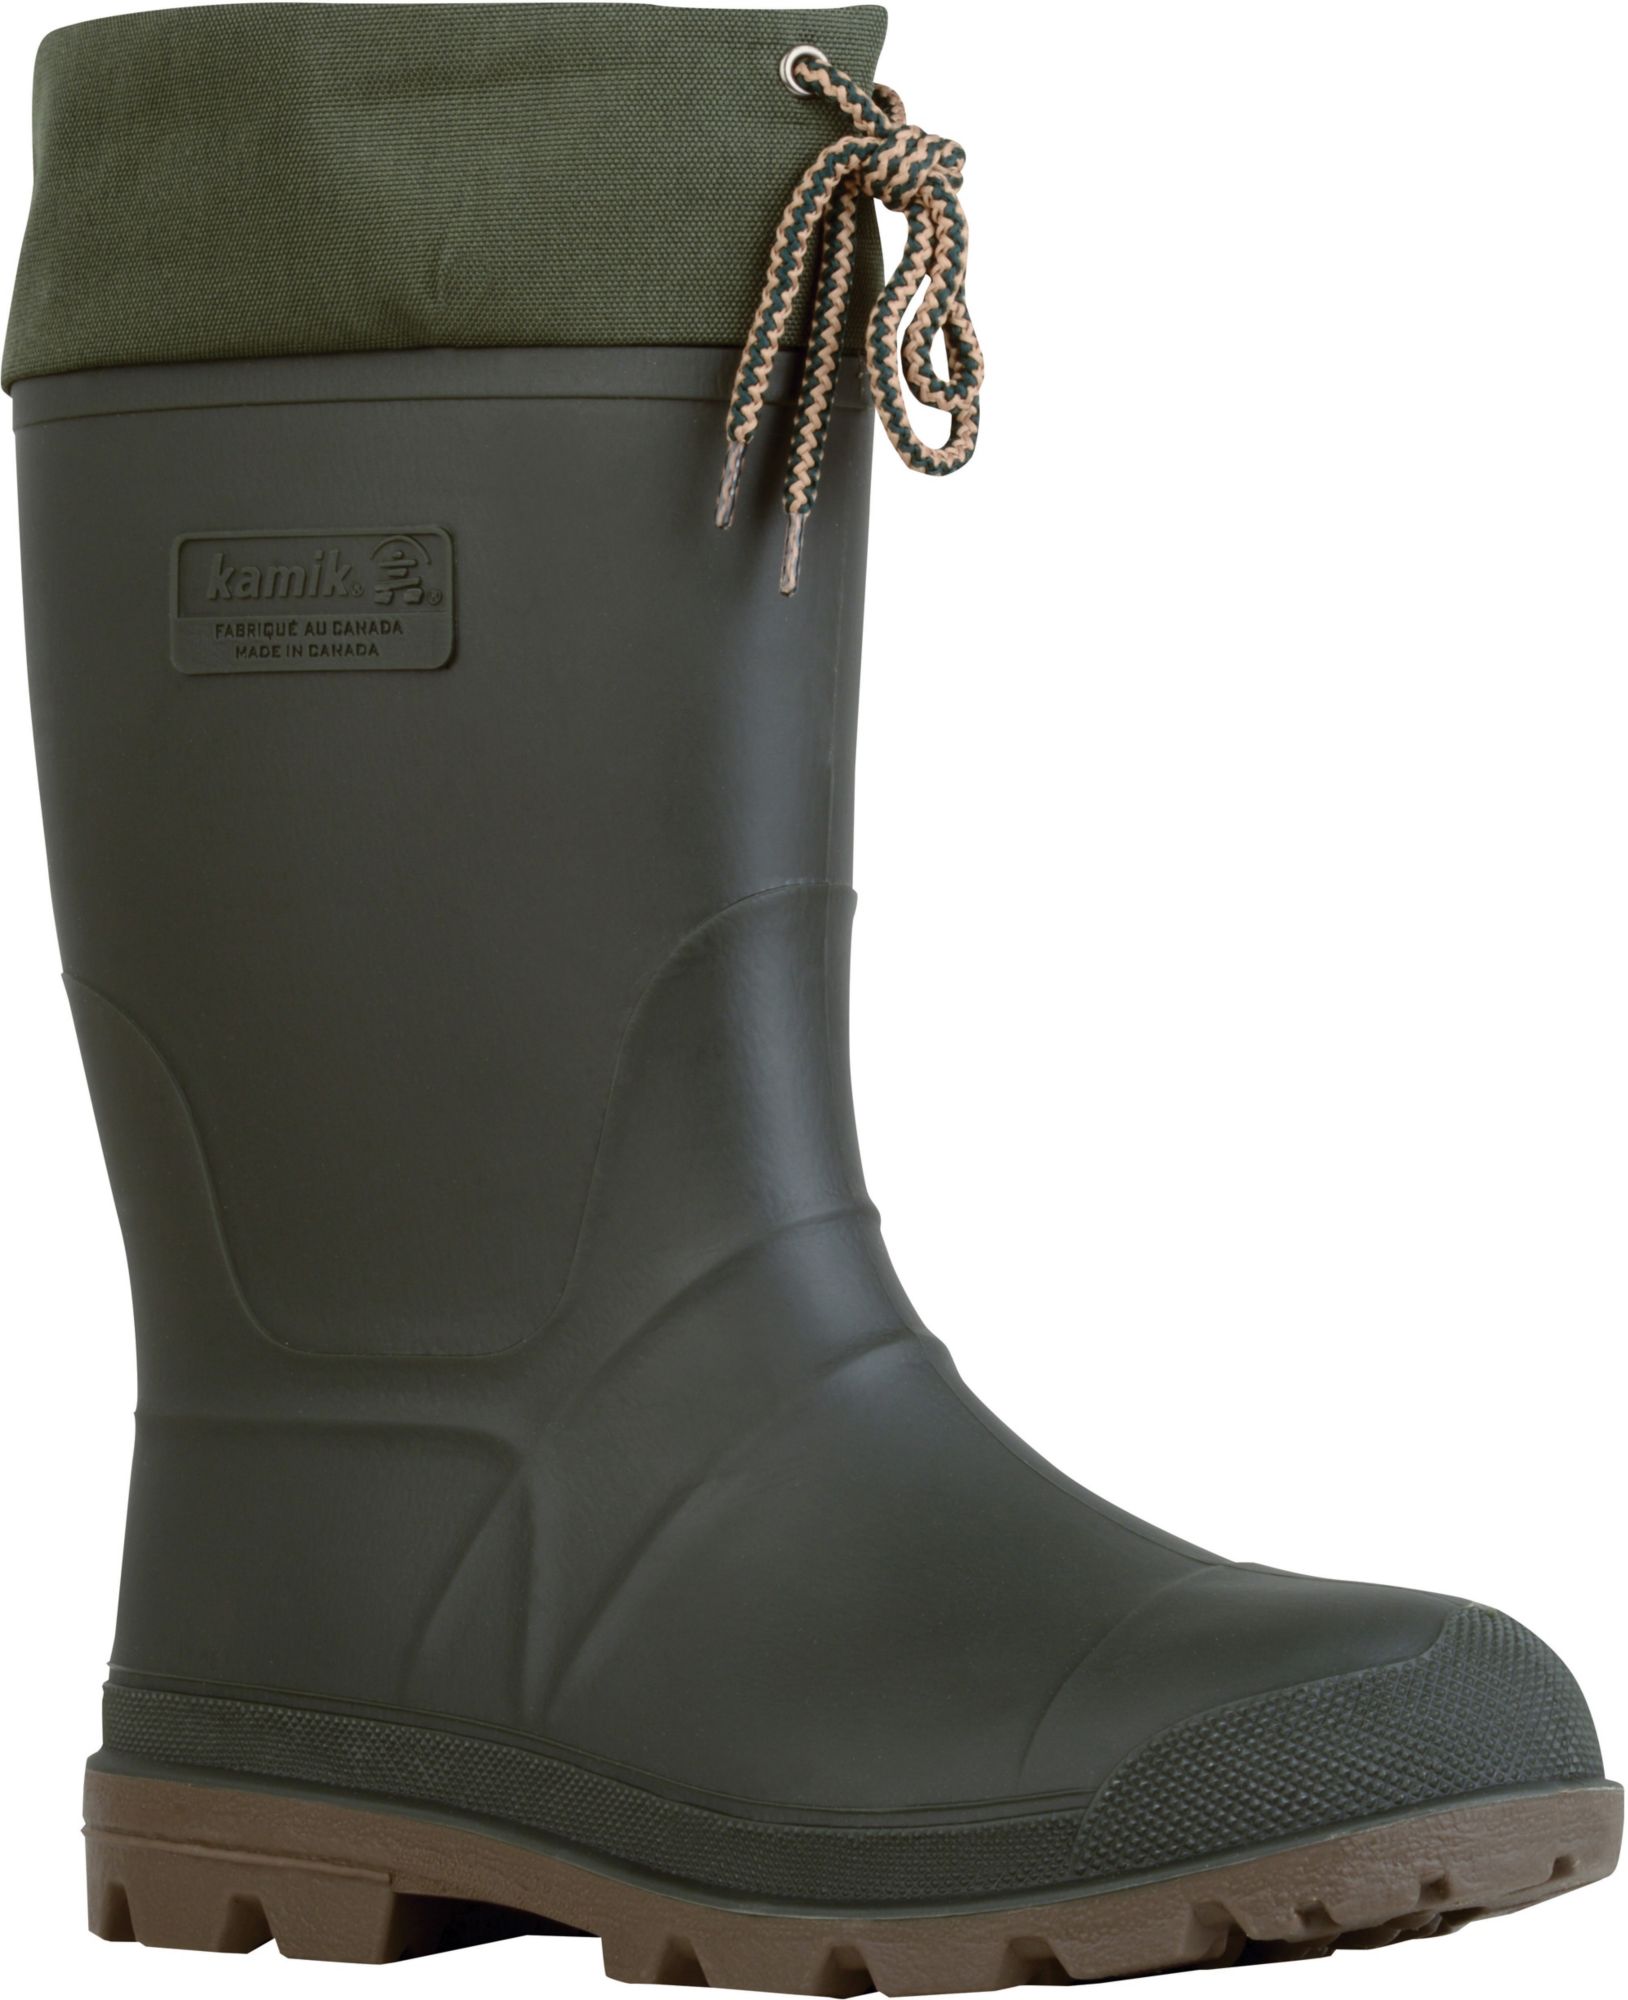 insulated rubber boots